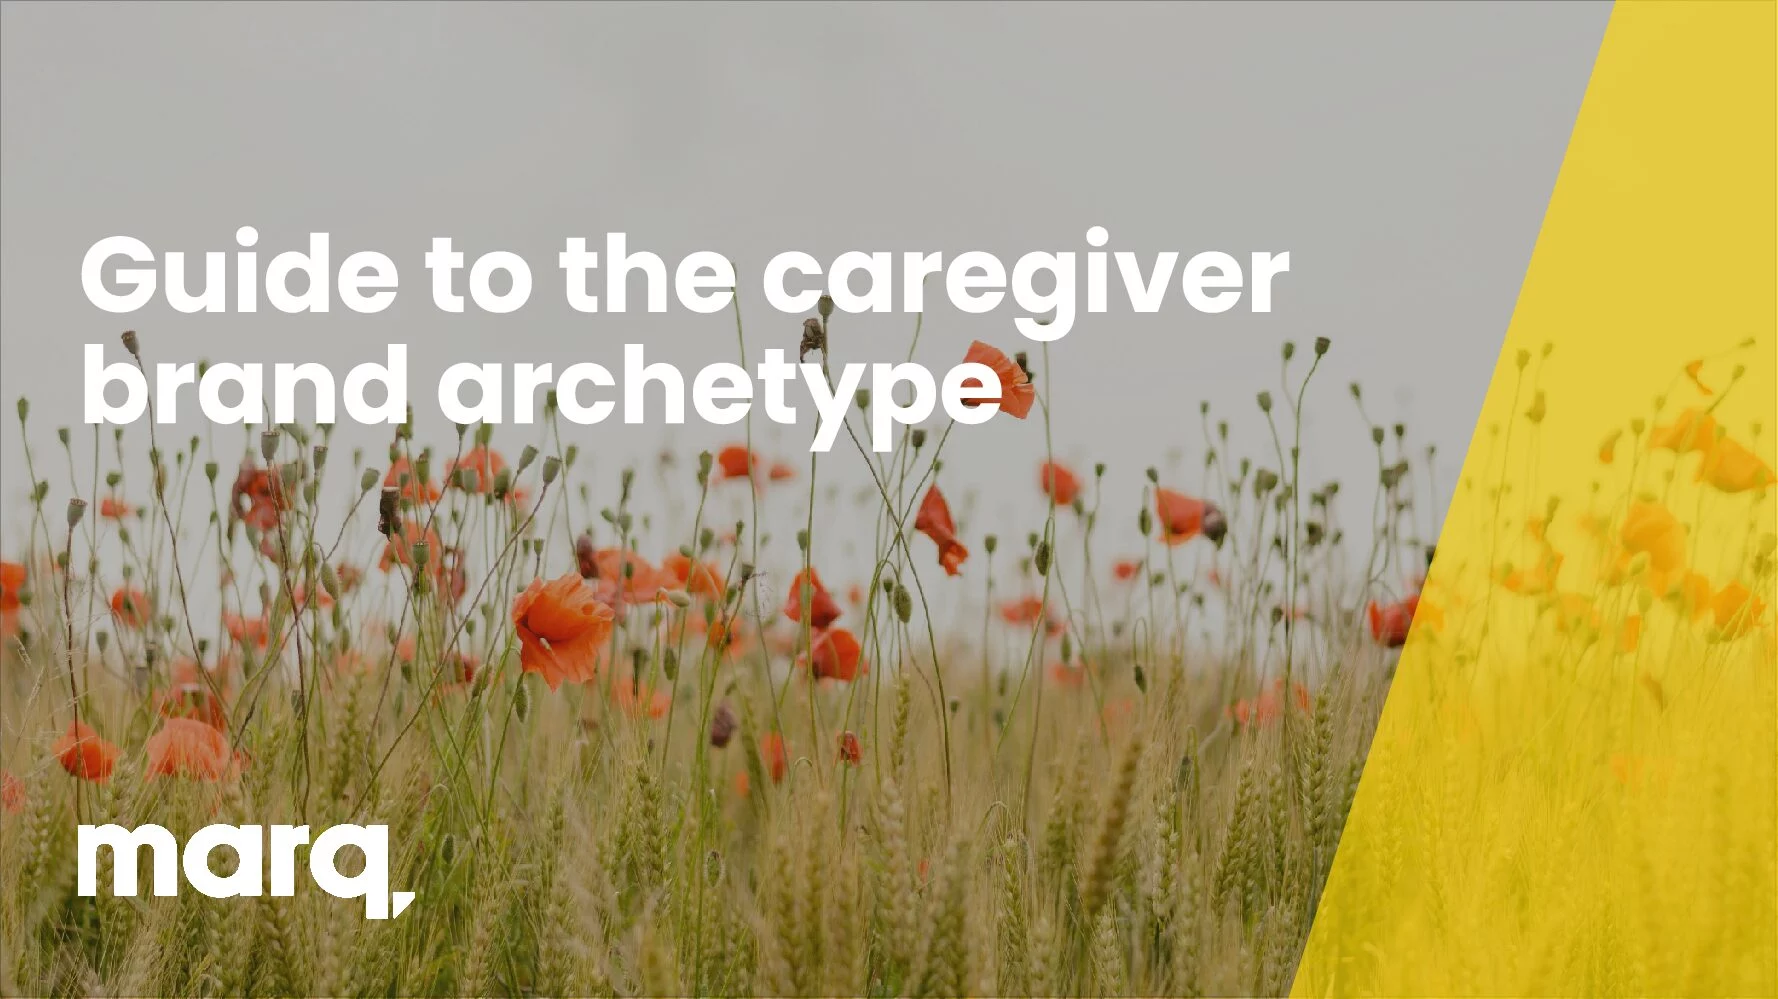 Guide to the caregiver brand archetype